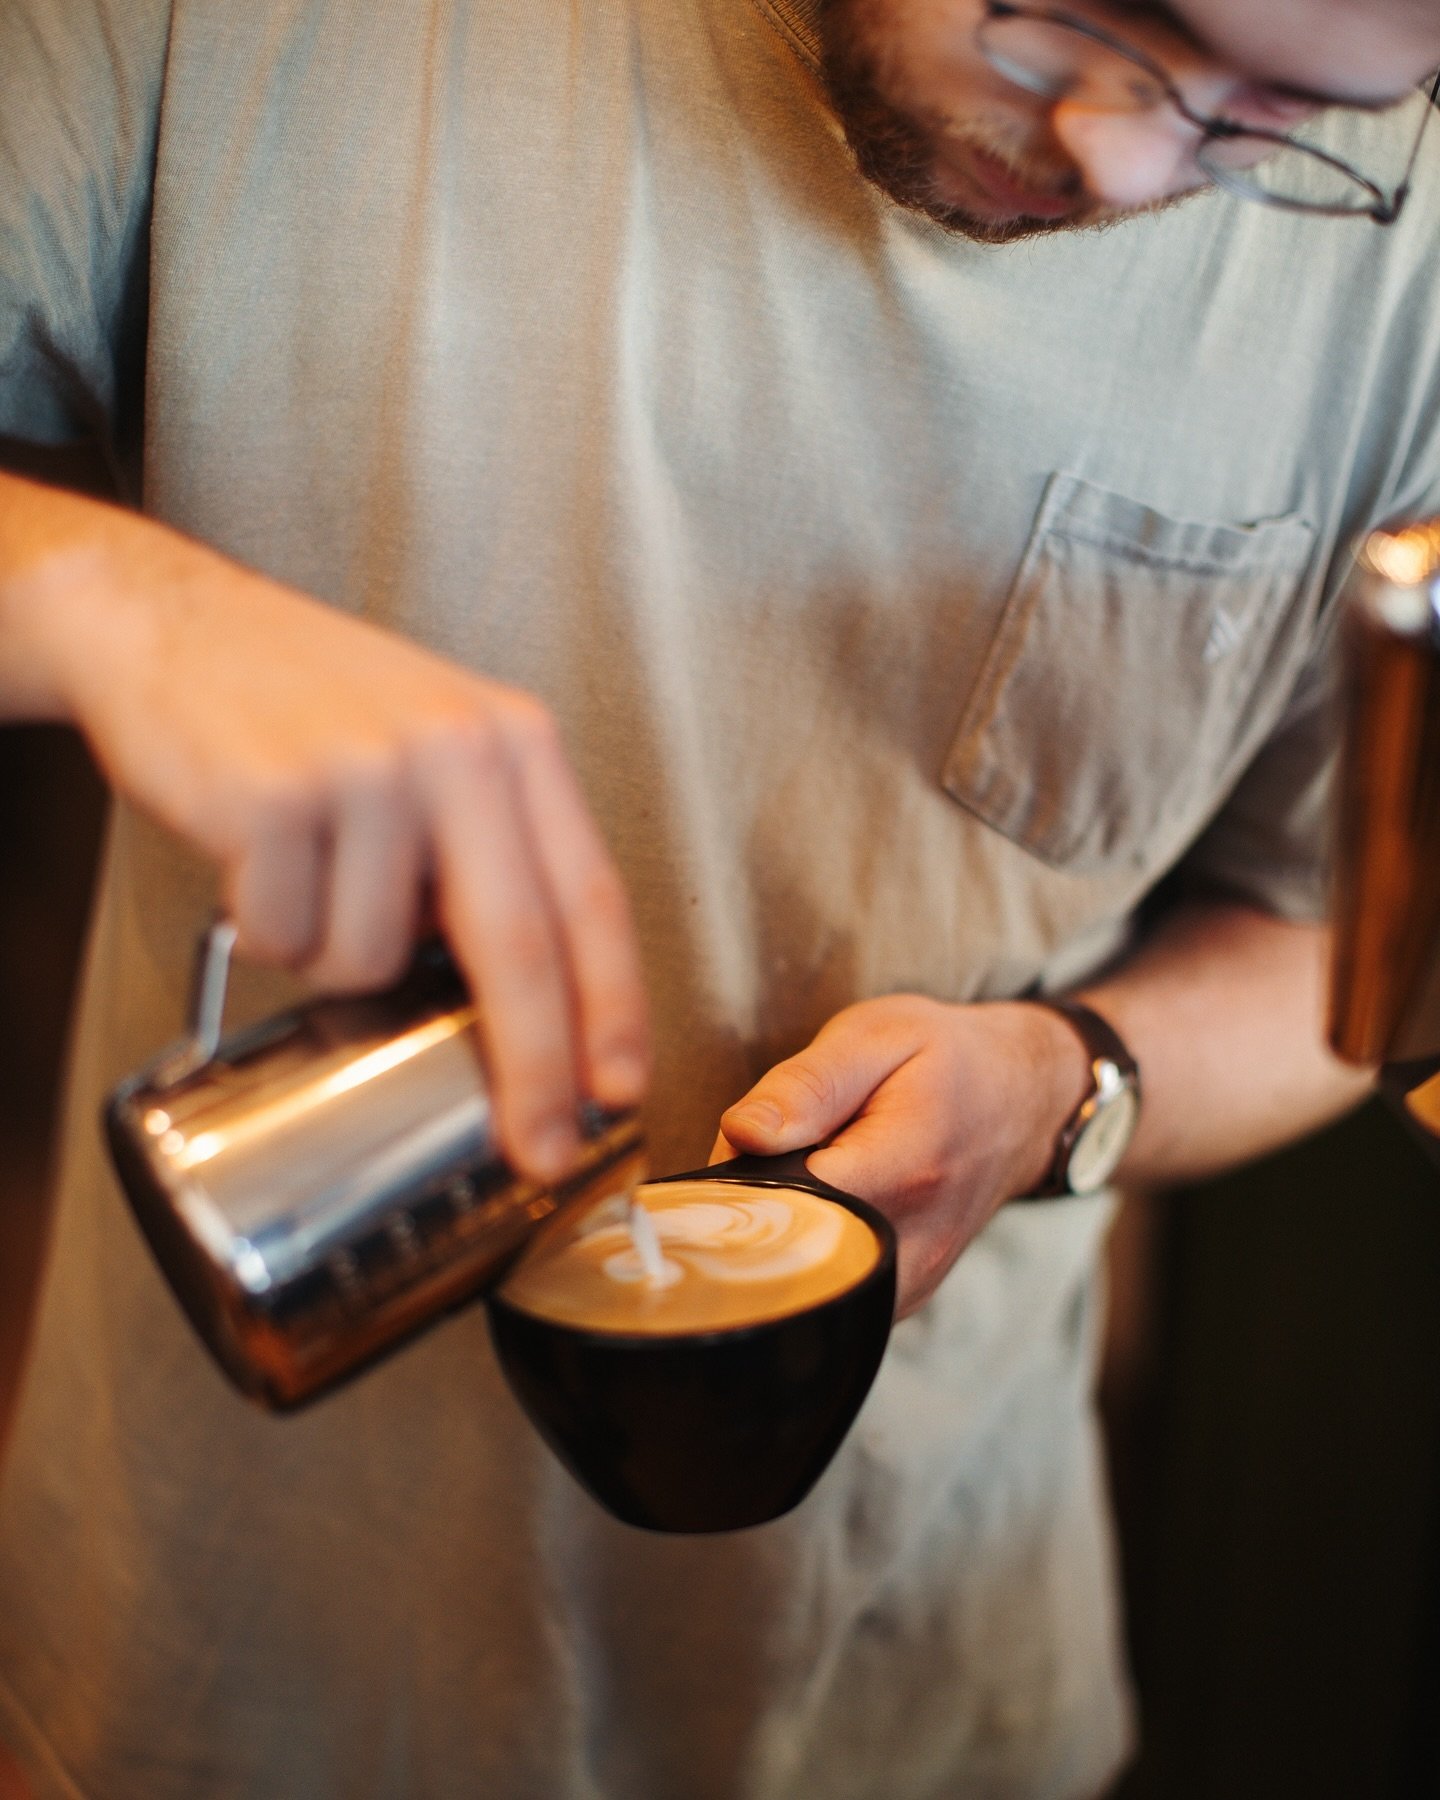 Ben is pouring up your favorite lattes this morning! Stop in for a pick-me-up on this gloomy Wednesday!
.
.
.
#coffee #coffeeshop #local #shoplocal #localcoffee #localcoffeeshop #coffeehouse #localcoffeehouse #latte #latteart #cappuccino #nexuscoffee